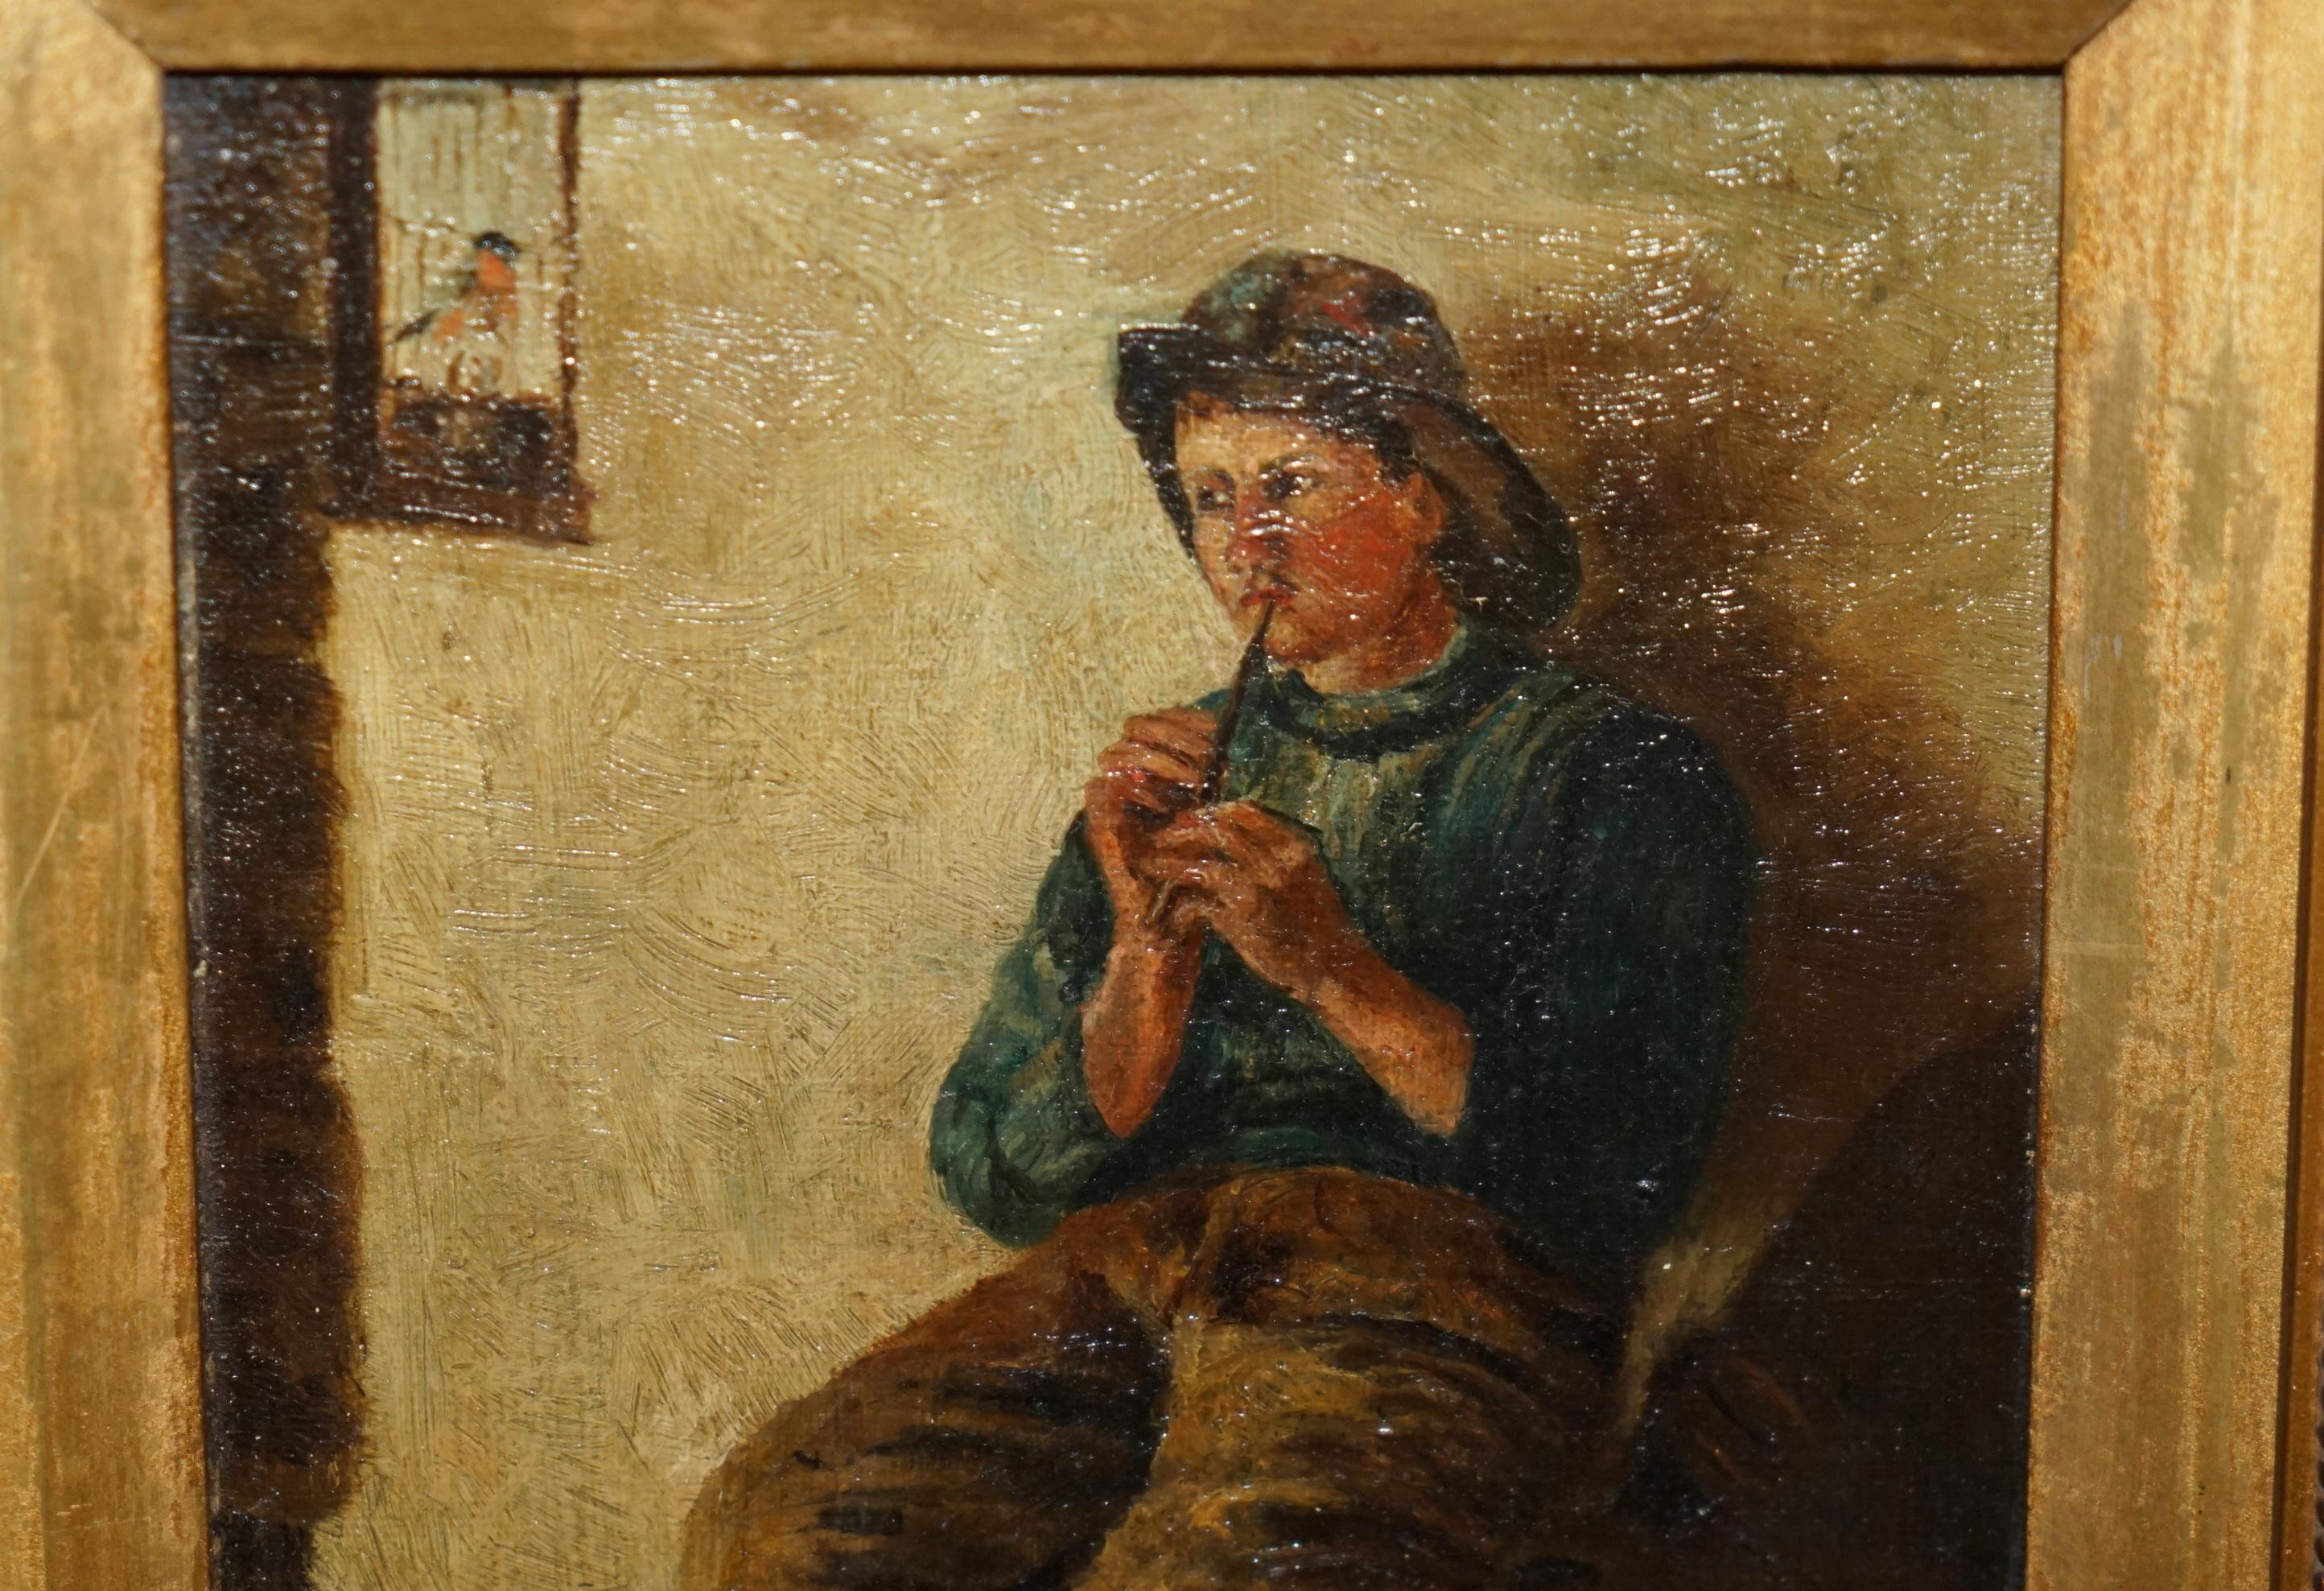 Hand-Painted SUBLIME ANTIQUE ViCTORIAN OIL PAINTING OF A YOUNG BOY (FISHERMAN) PLAYING A PIPE